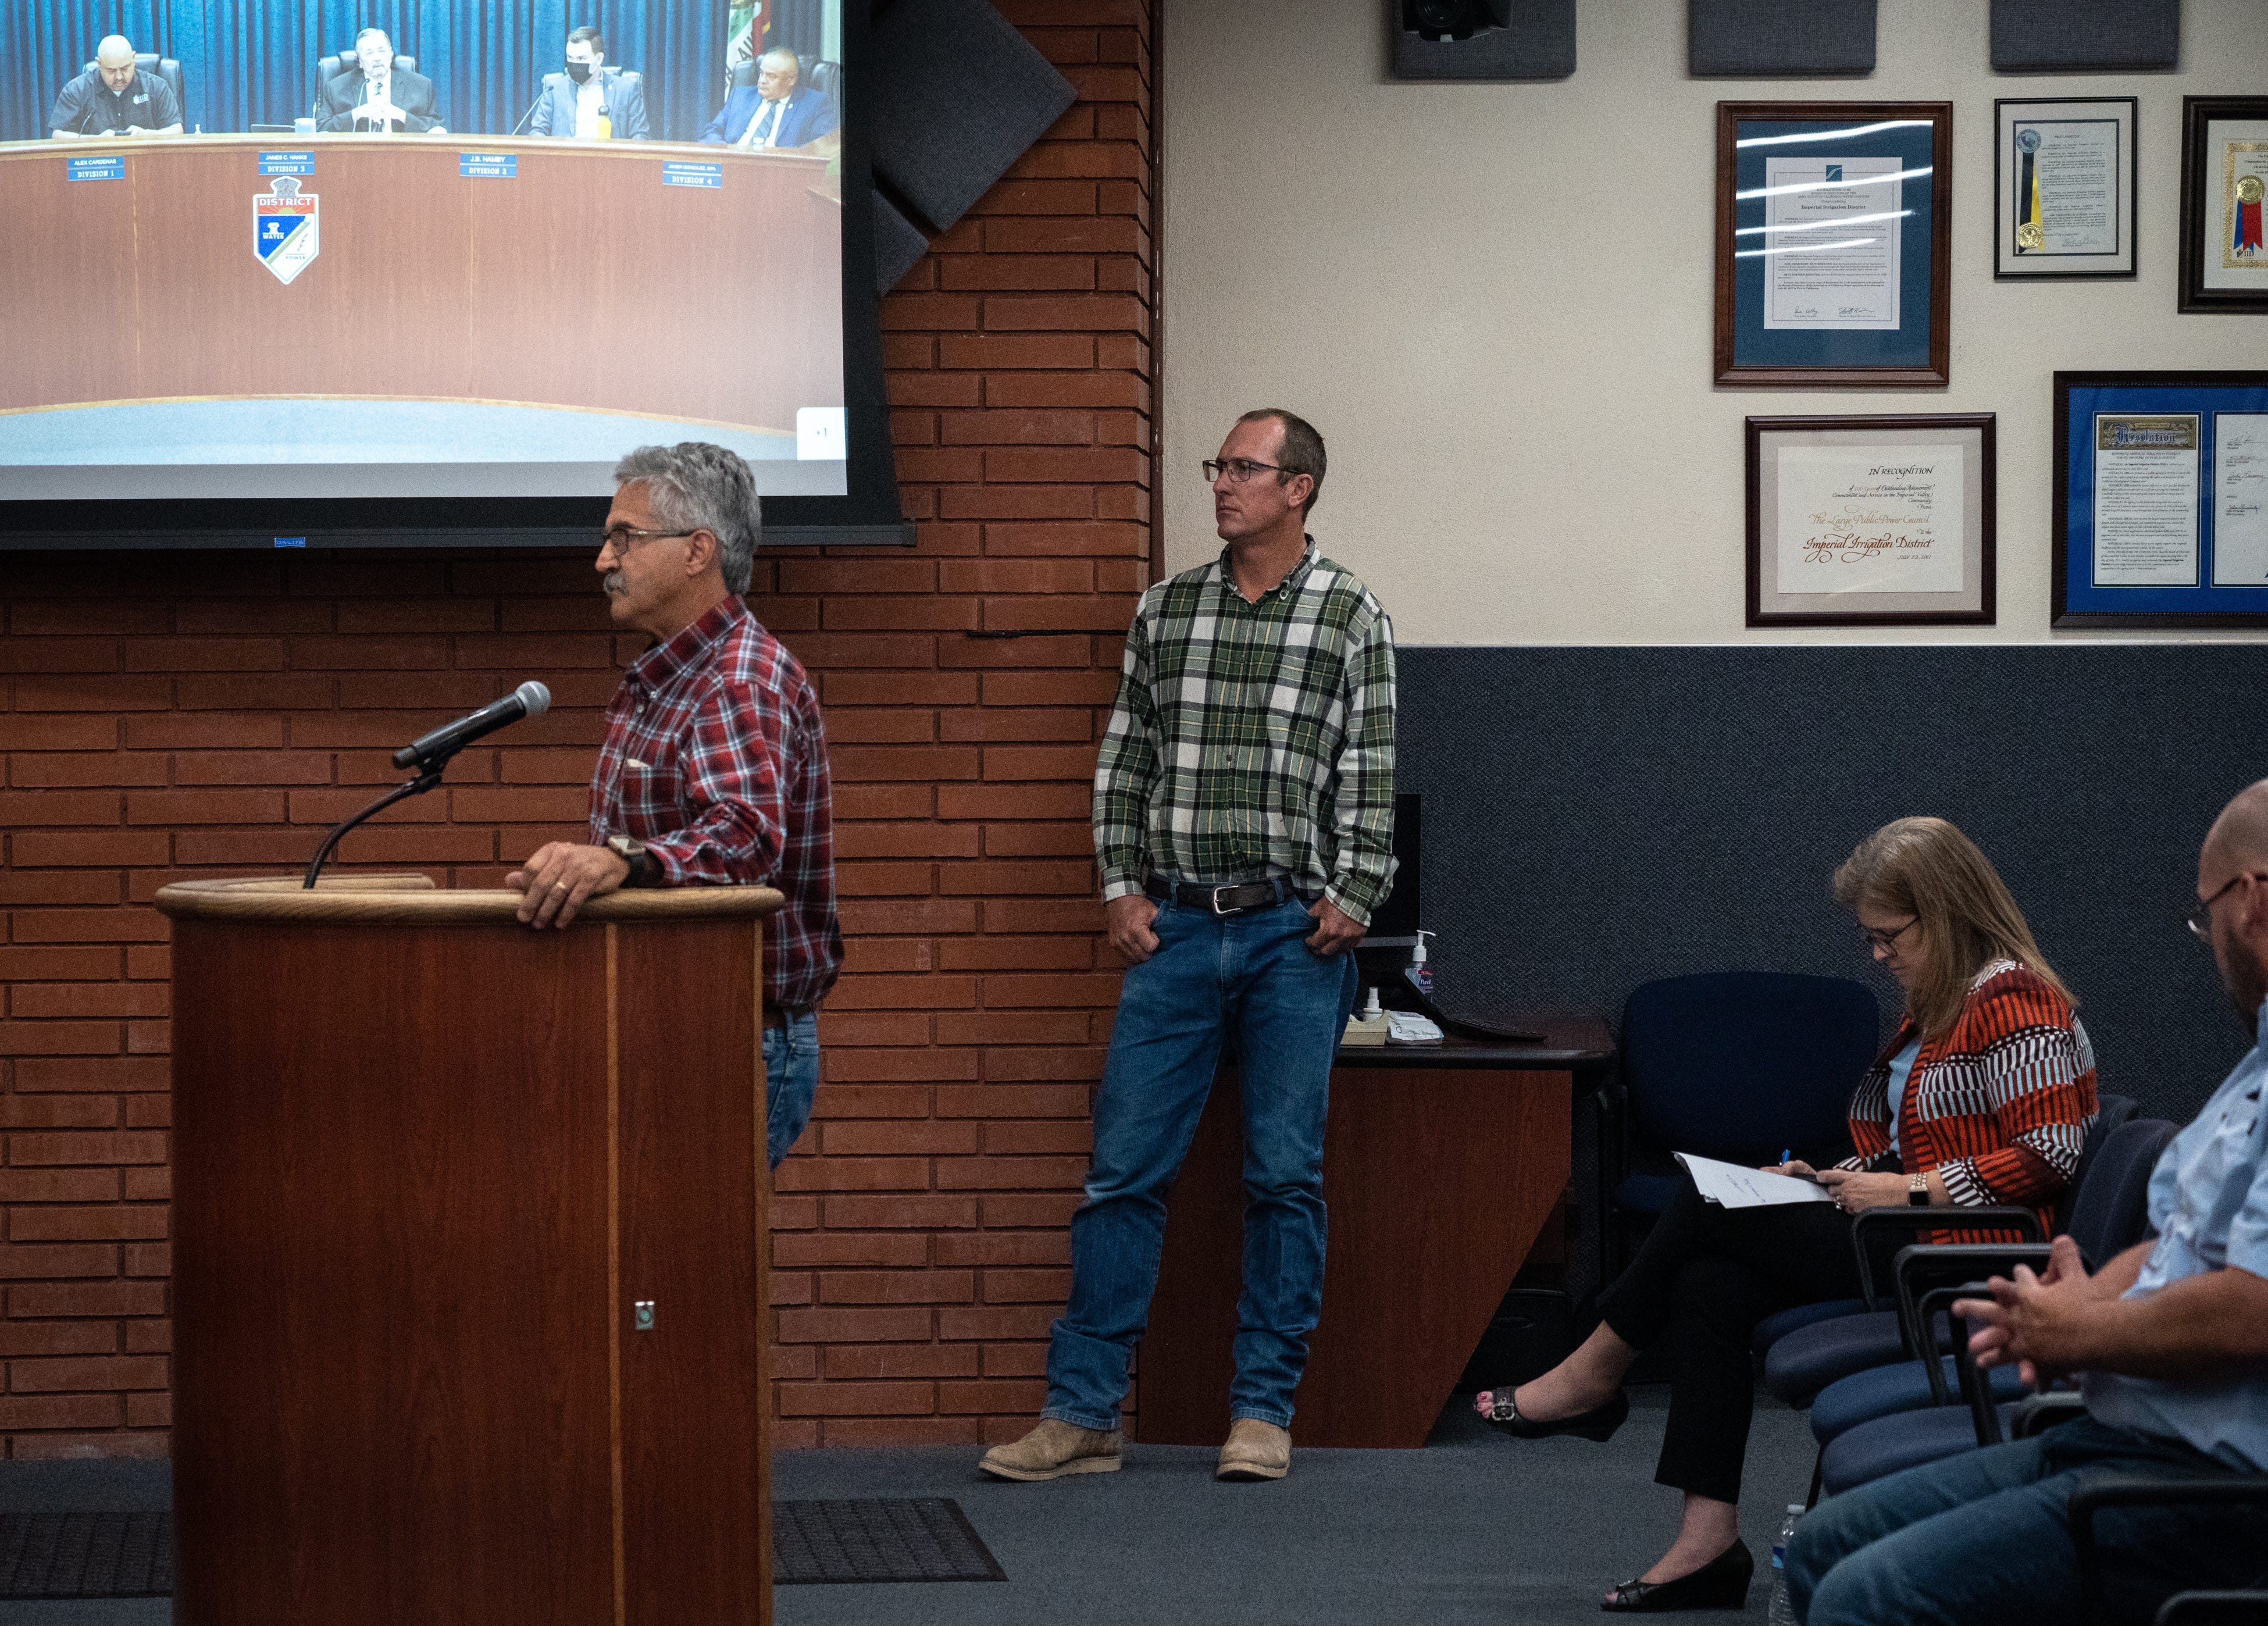 Tyler Sutter (center) waits to speak at an Imperial Irrigation District meeting on May 17, 2022, in William R. Condit Auditorium in El Centro, California. Sutter told officials he'd rather avoid rationing his water by having the district pay other farmers to conserve more.